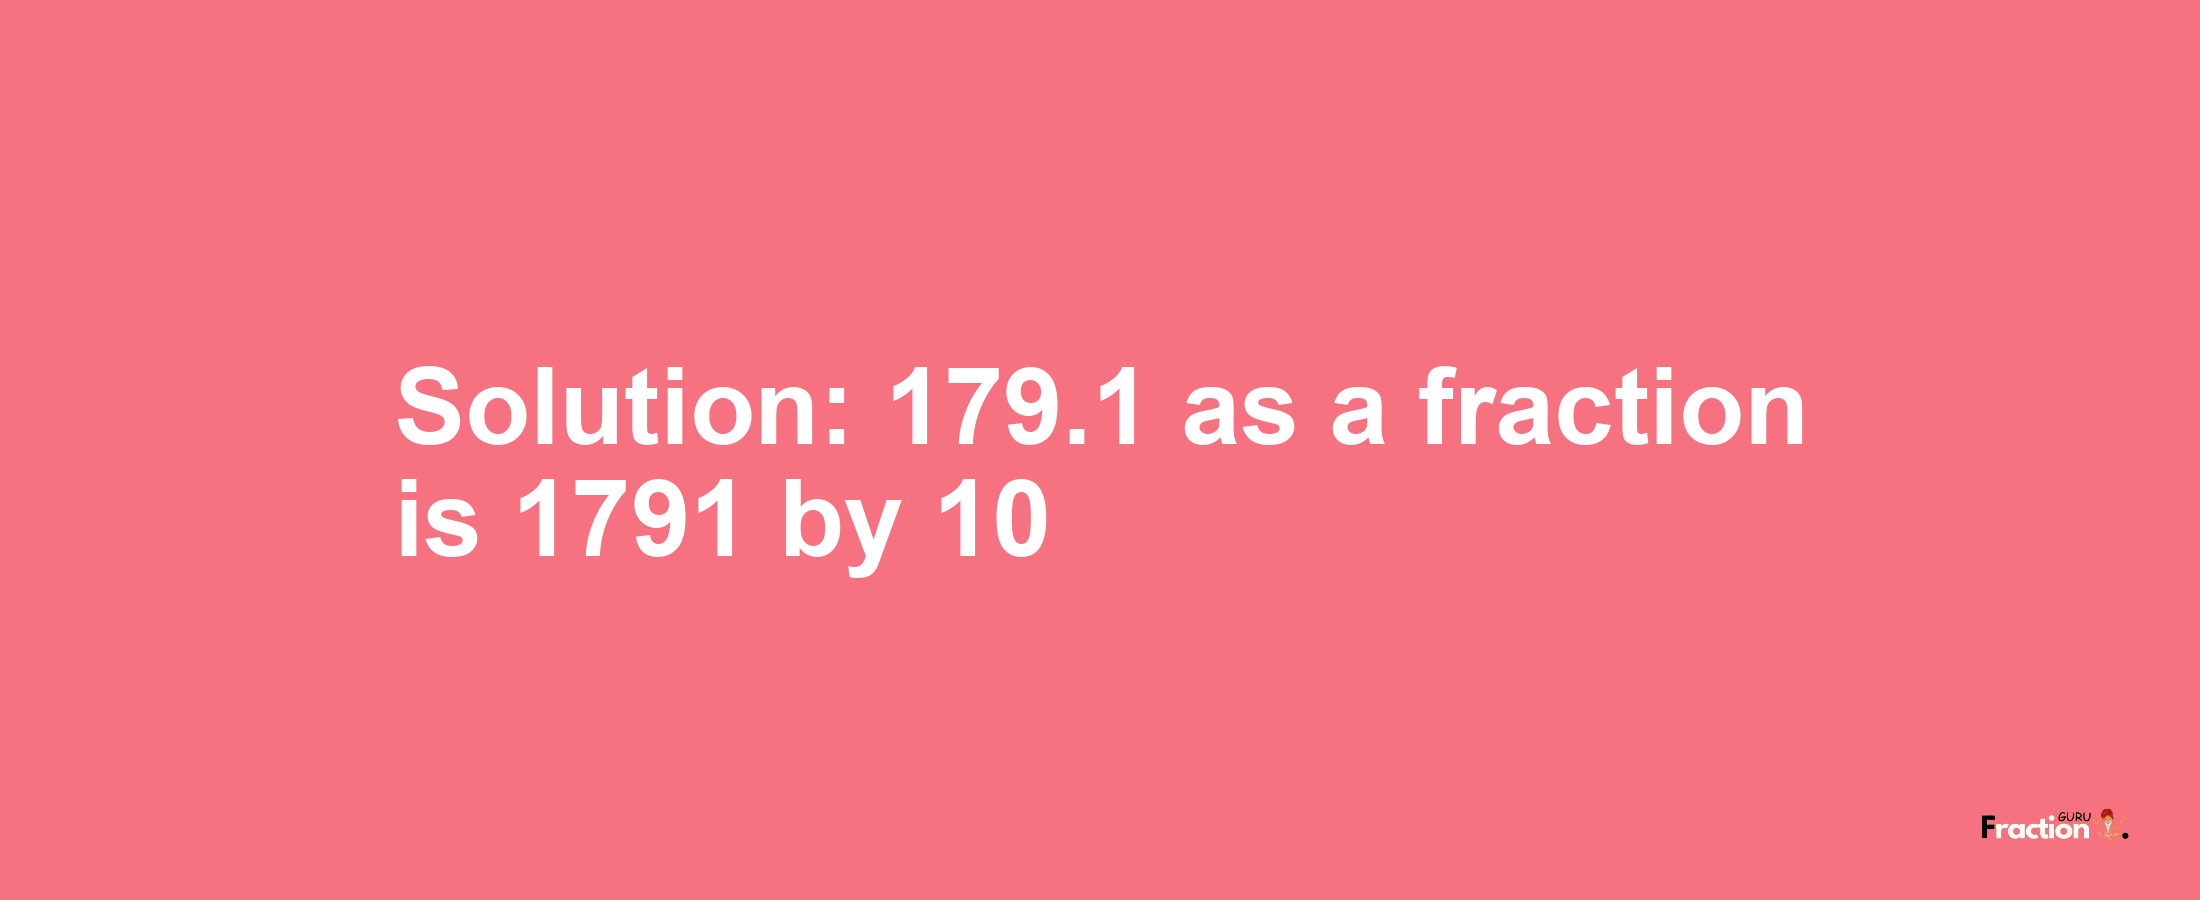 Solution:179.1 as a fraction is 1791/10